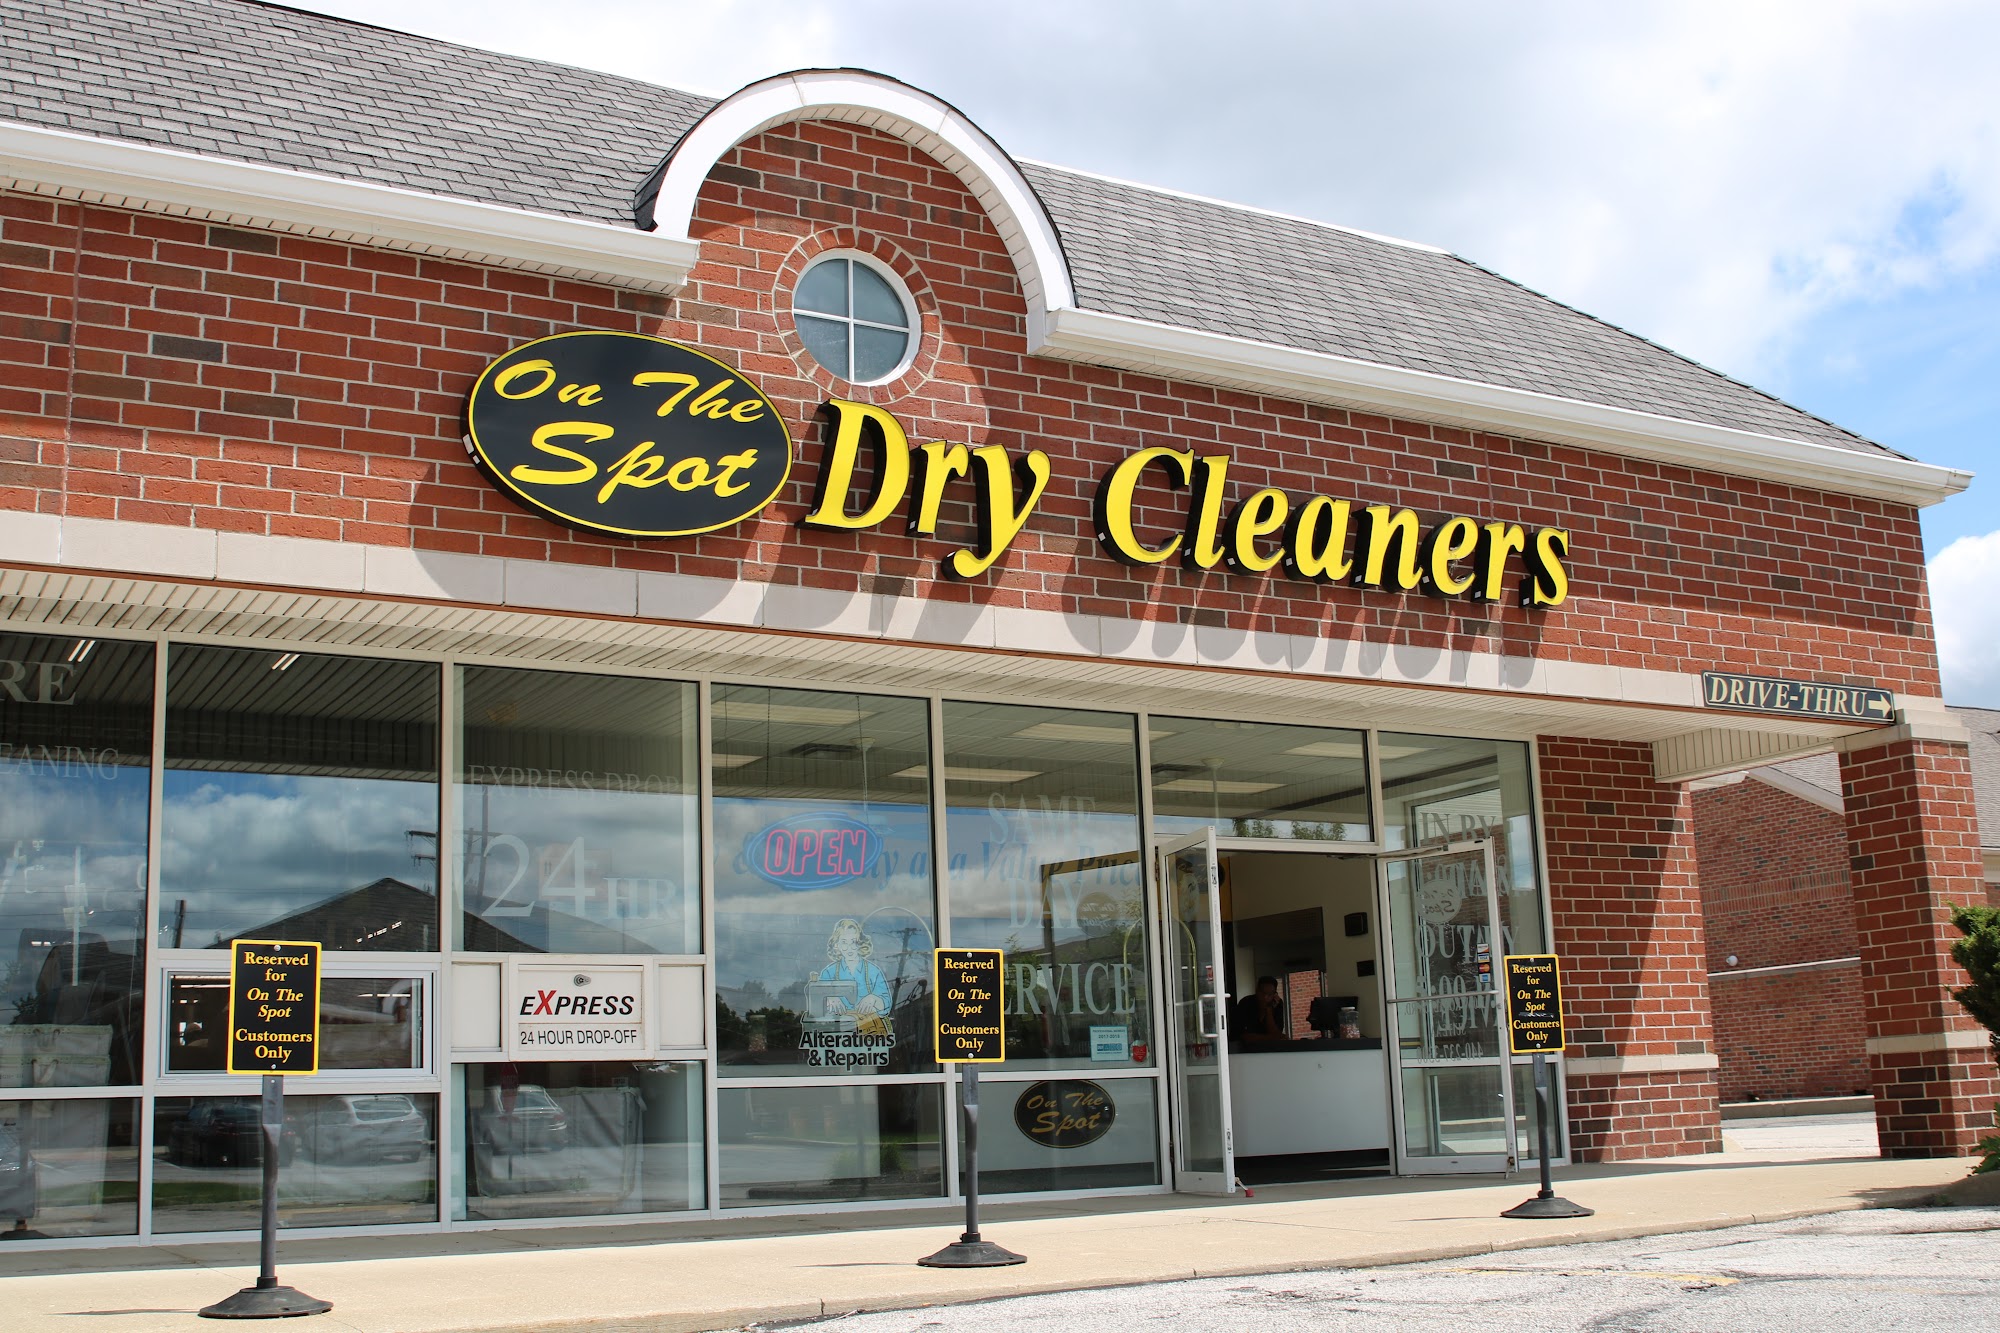 On The Spot Dry Cleaners